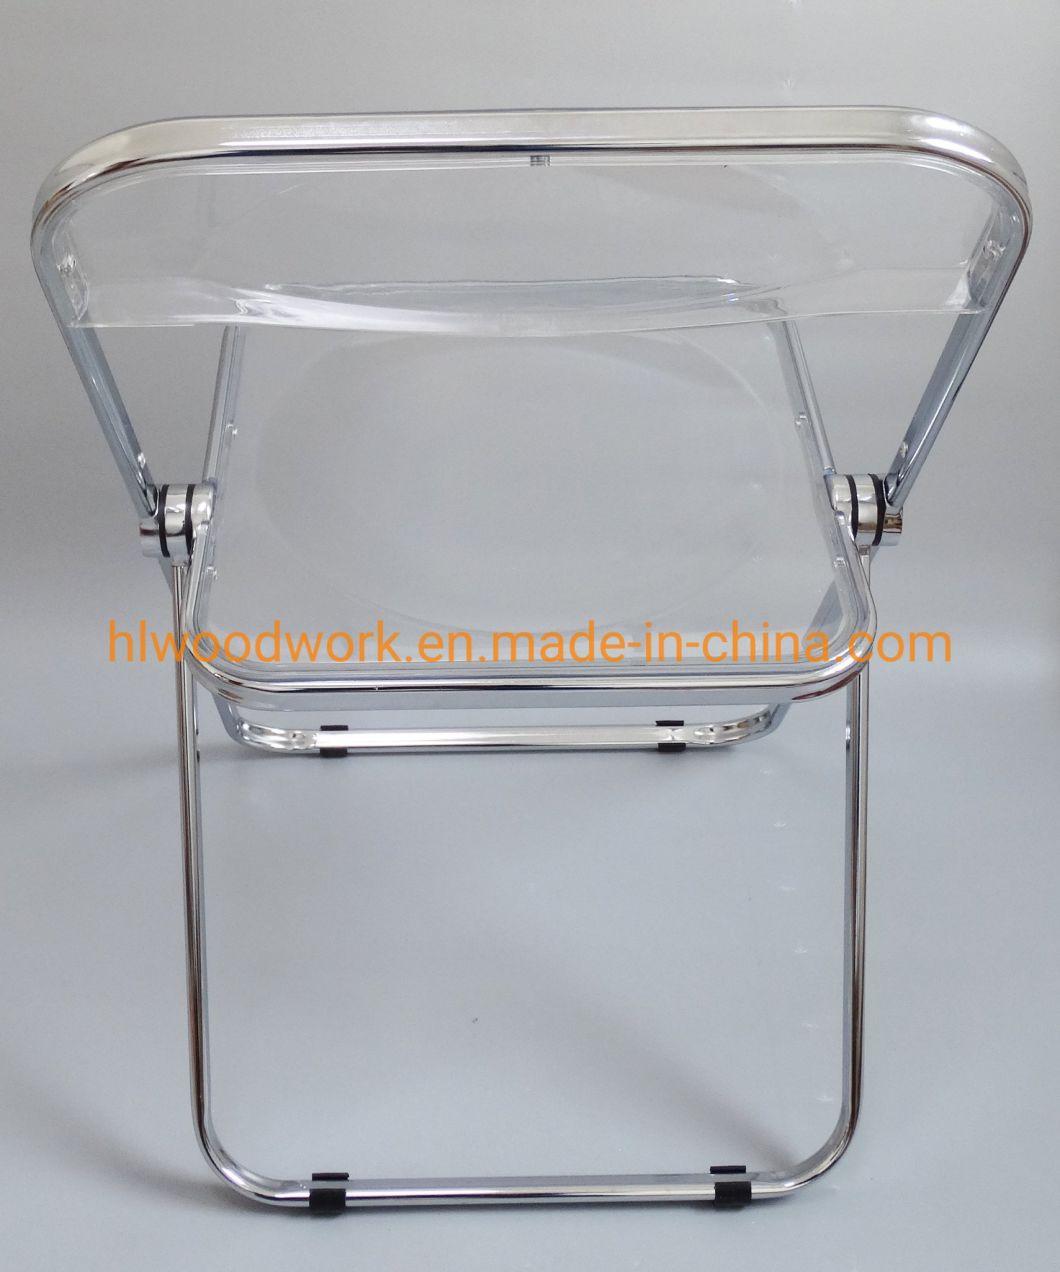 Modern Pink Plastic Folded Chair Office/Bar/Dining/Leisure/Banquet/Wedding/Meeting Chair in Chrome Frame Transparent Clear PC Plastic Dining Chair